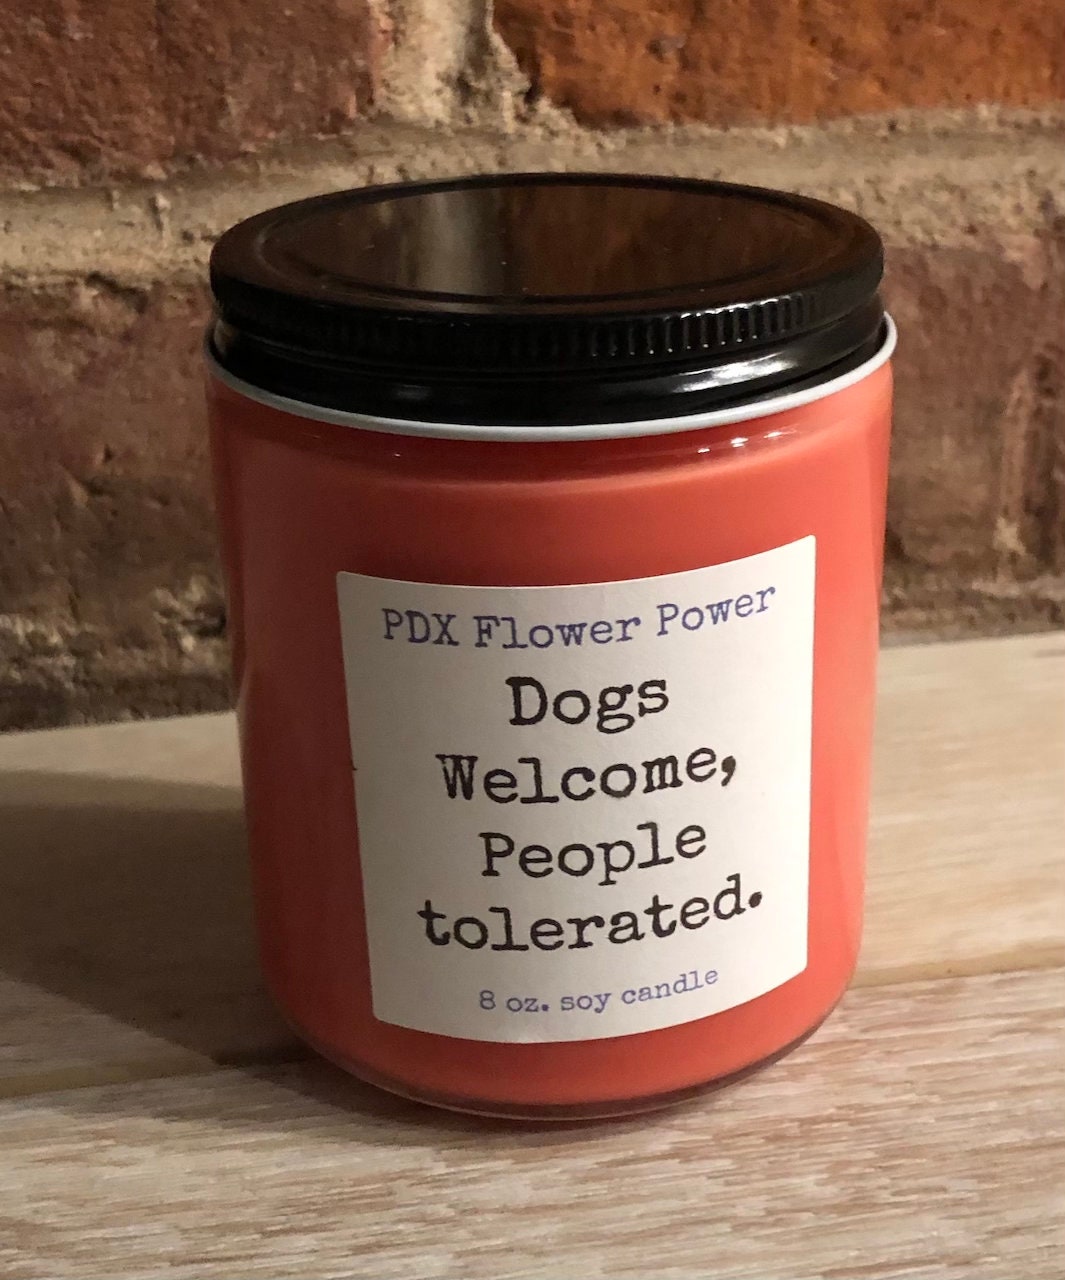 PDX Flower Power " Dogs welcome, people tolerated" soy candle